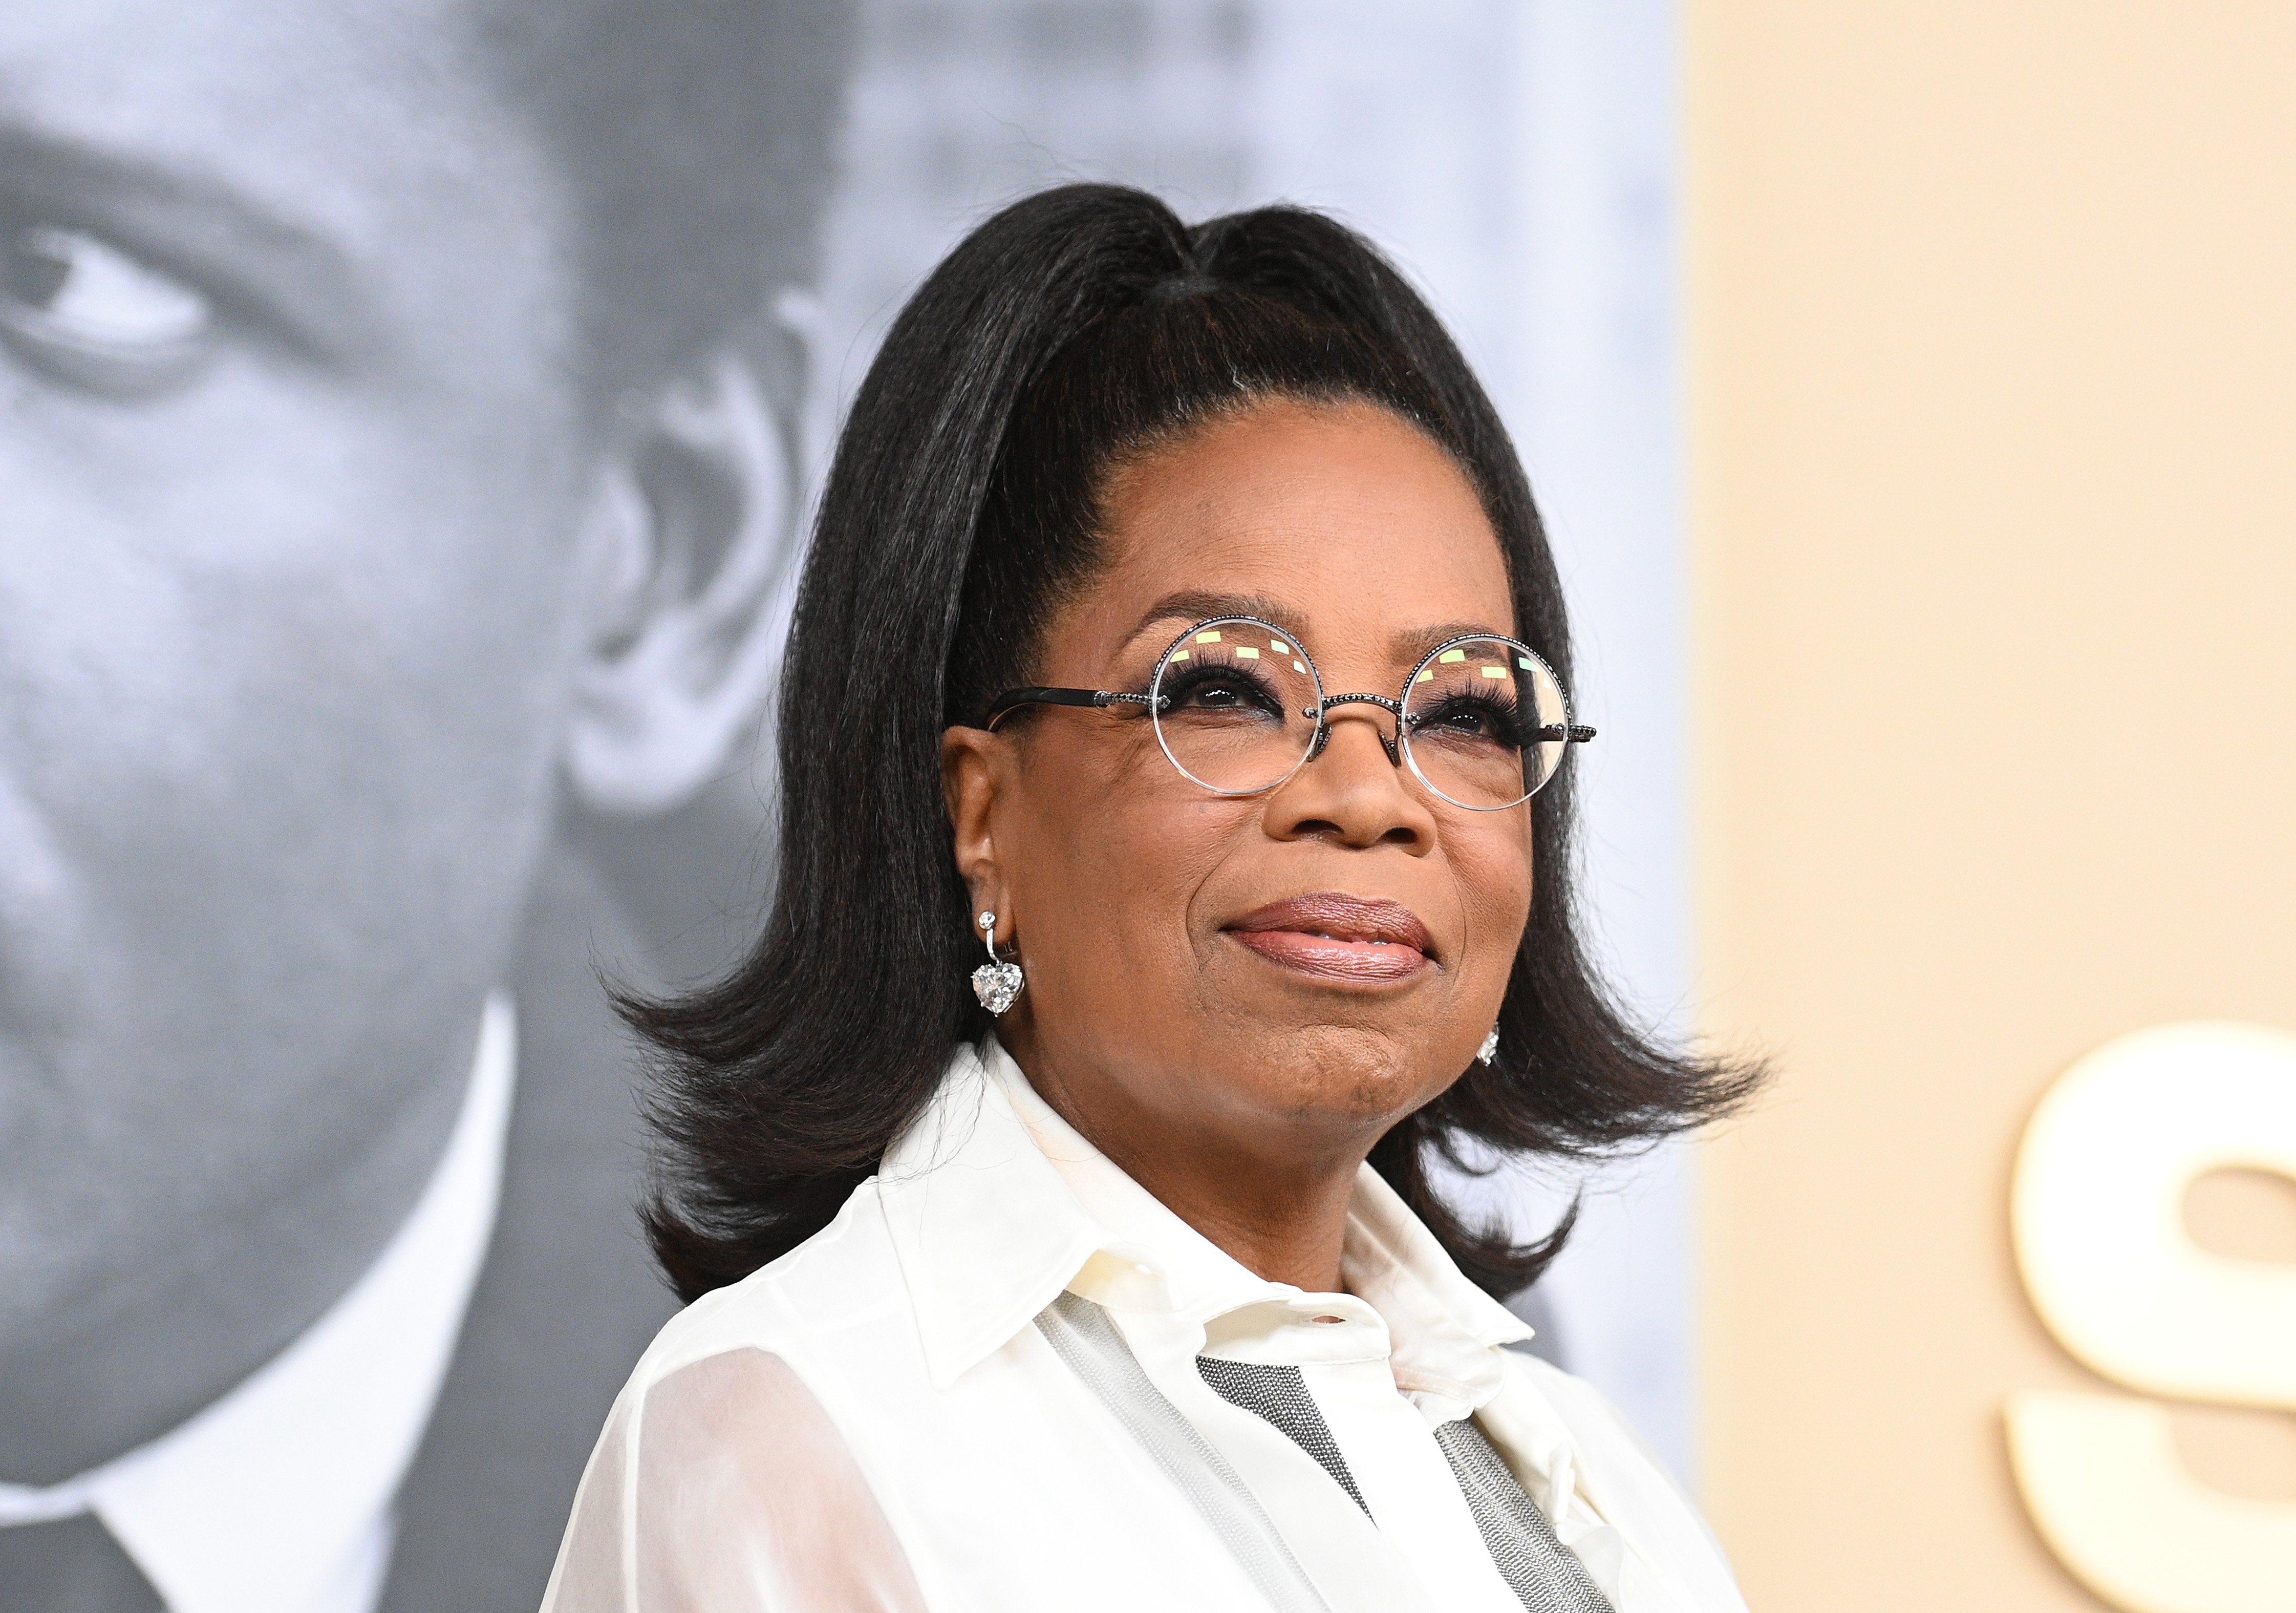 Oprah Winfrey at the premiere of "Sidney" held at the Academy Museum of Motion Pictures on September 21, 2022 in Los Angeles, California | Source: Getty Images